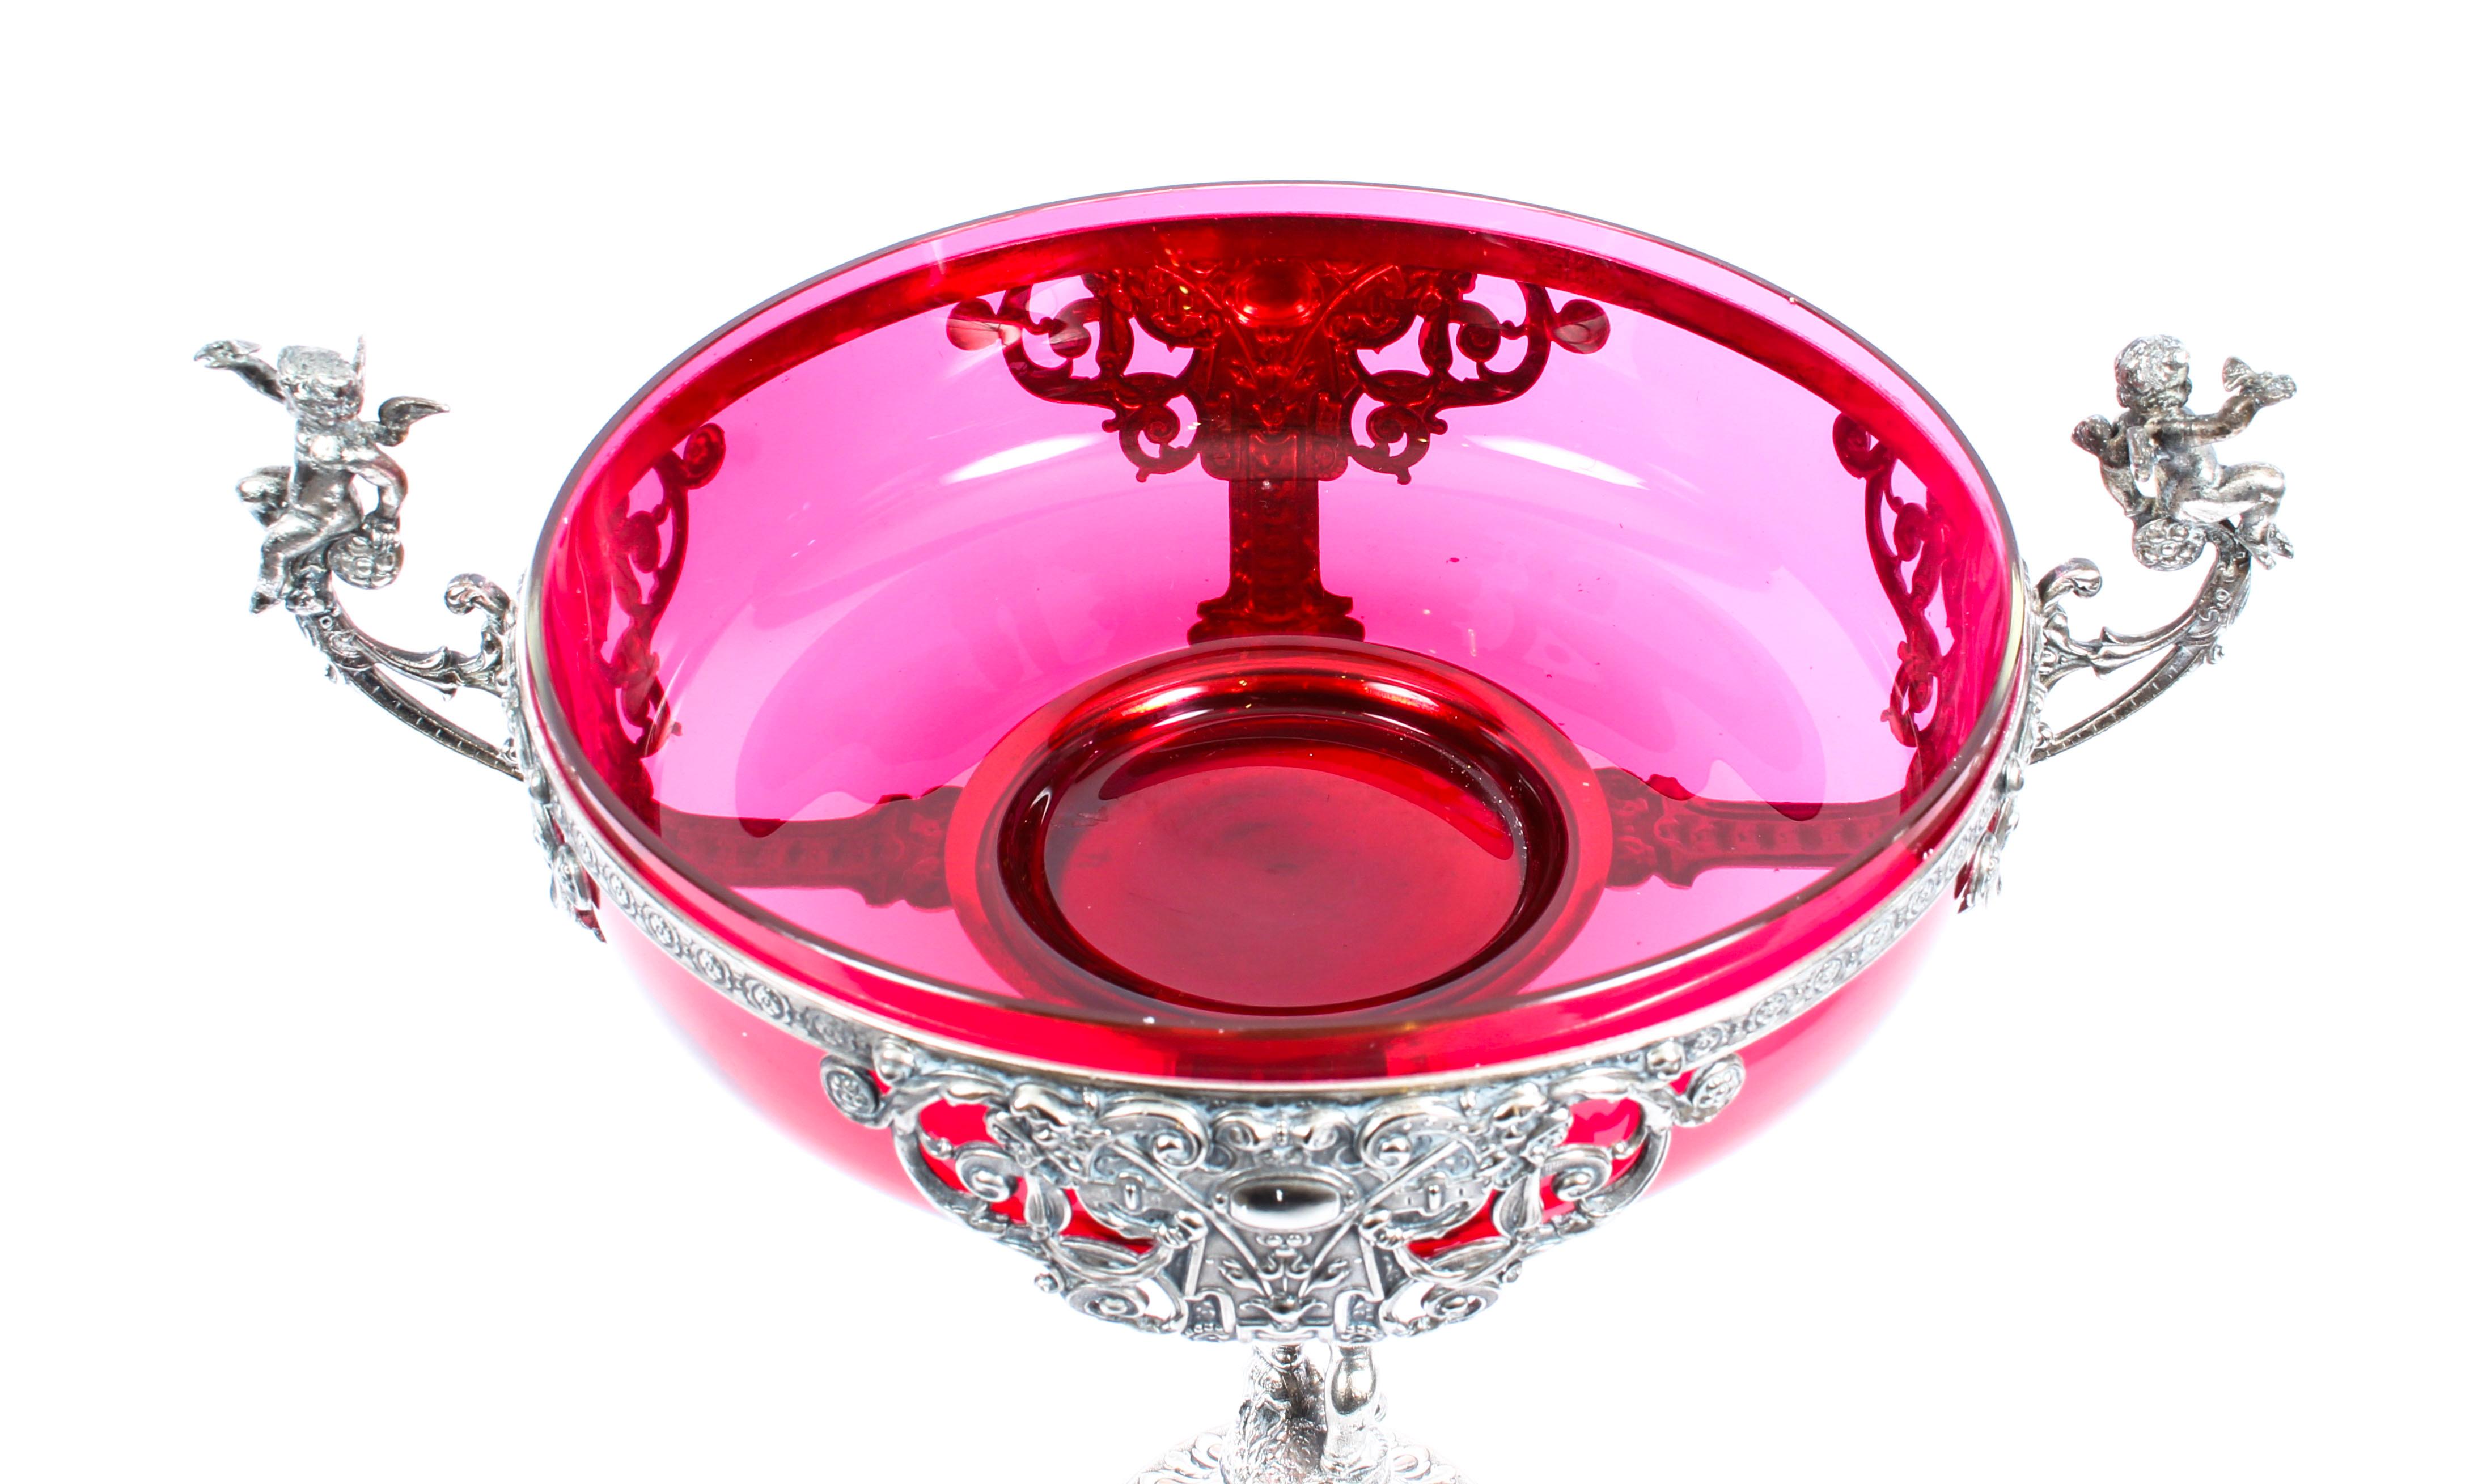 This is a magnificent German WMF Art Nouveau silver plated and cranberry glass centrepiece, circa 1890 in date.

This stunning centrepiece features two beautiful silver plated winged cherubs - one on each side of the large round cranberry glass